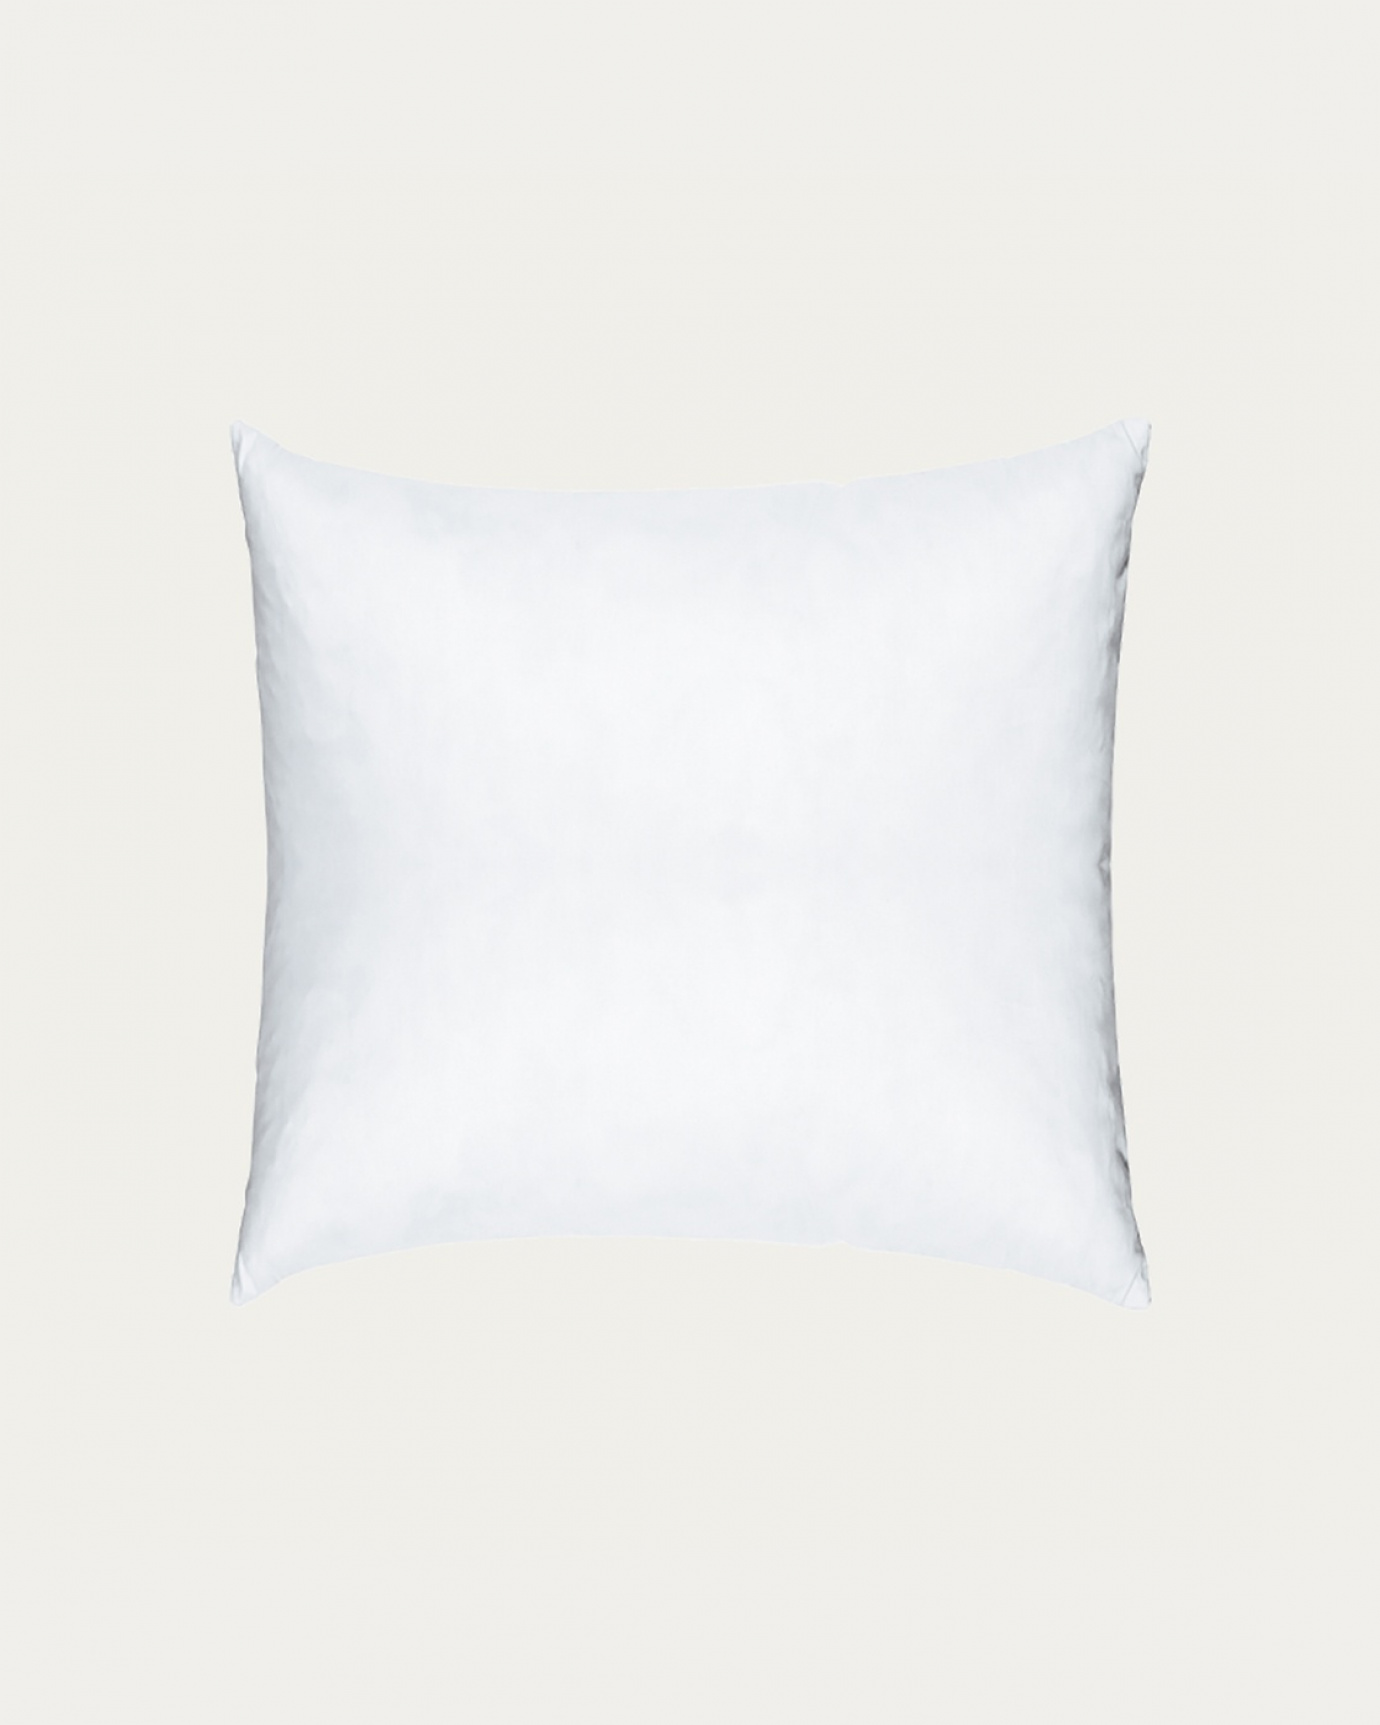 Product image white FEATHER cushion insert made of cotton with feather filling from LINUM DESIGN. Size 40x40 cm.